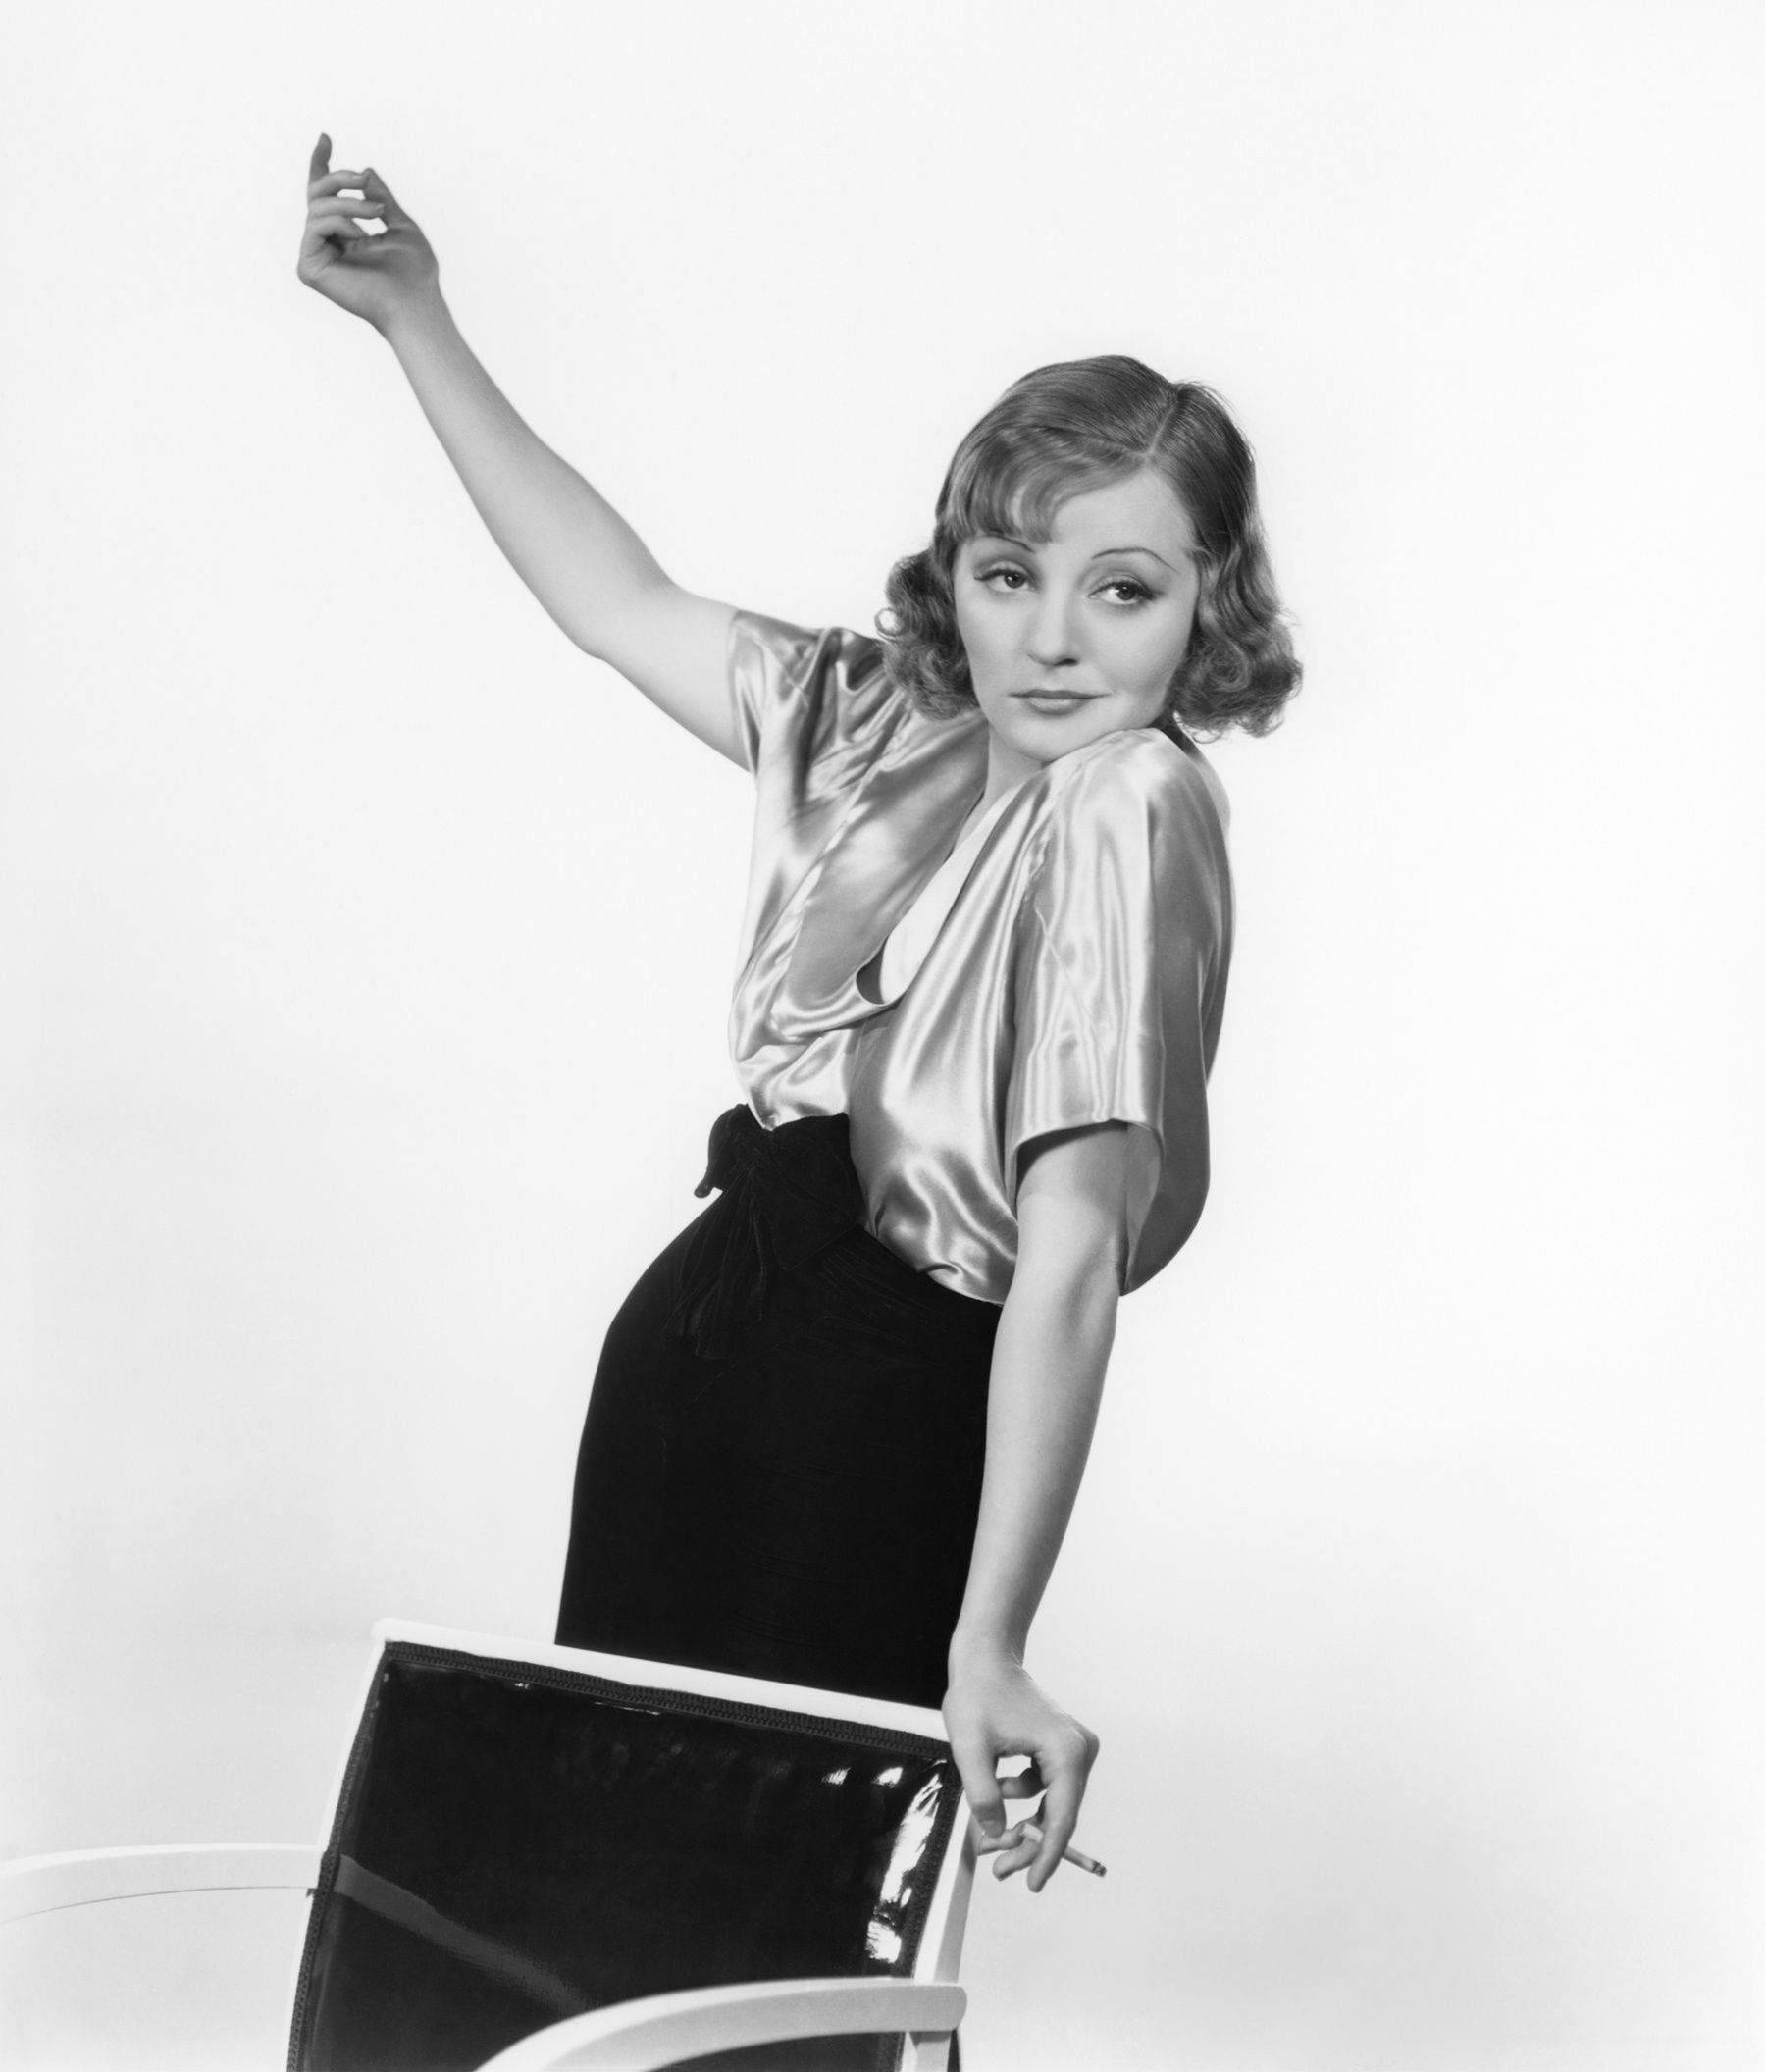 Pictures Of Tallulah Bankhead